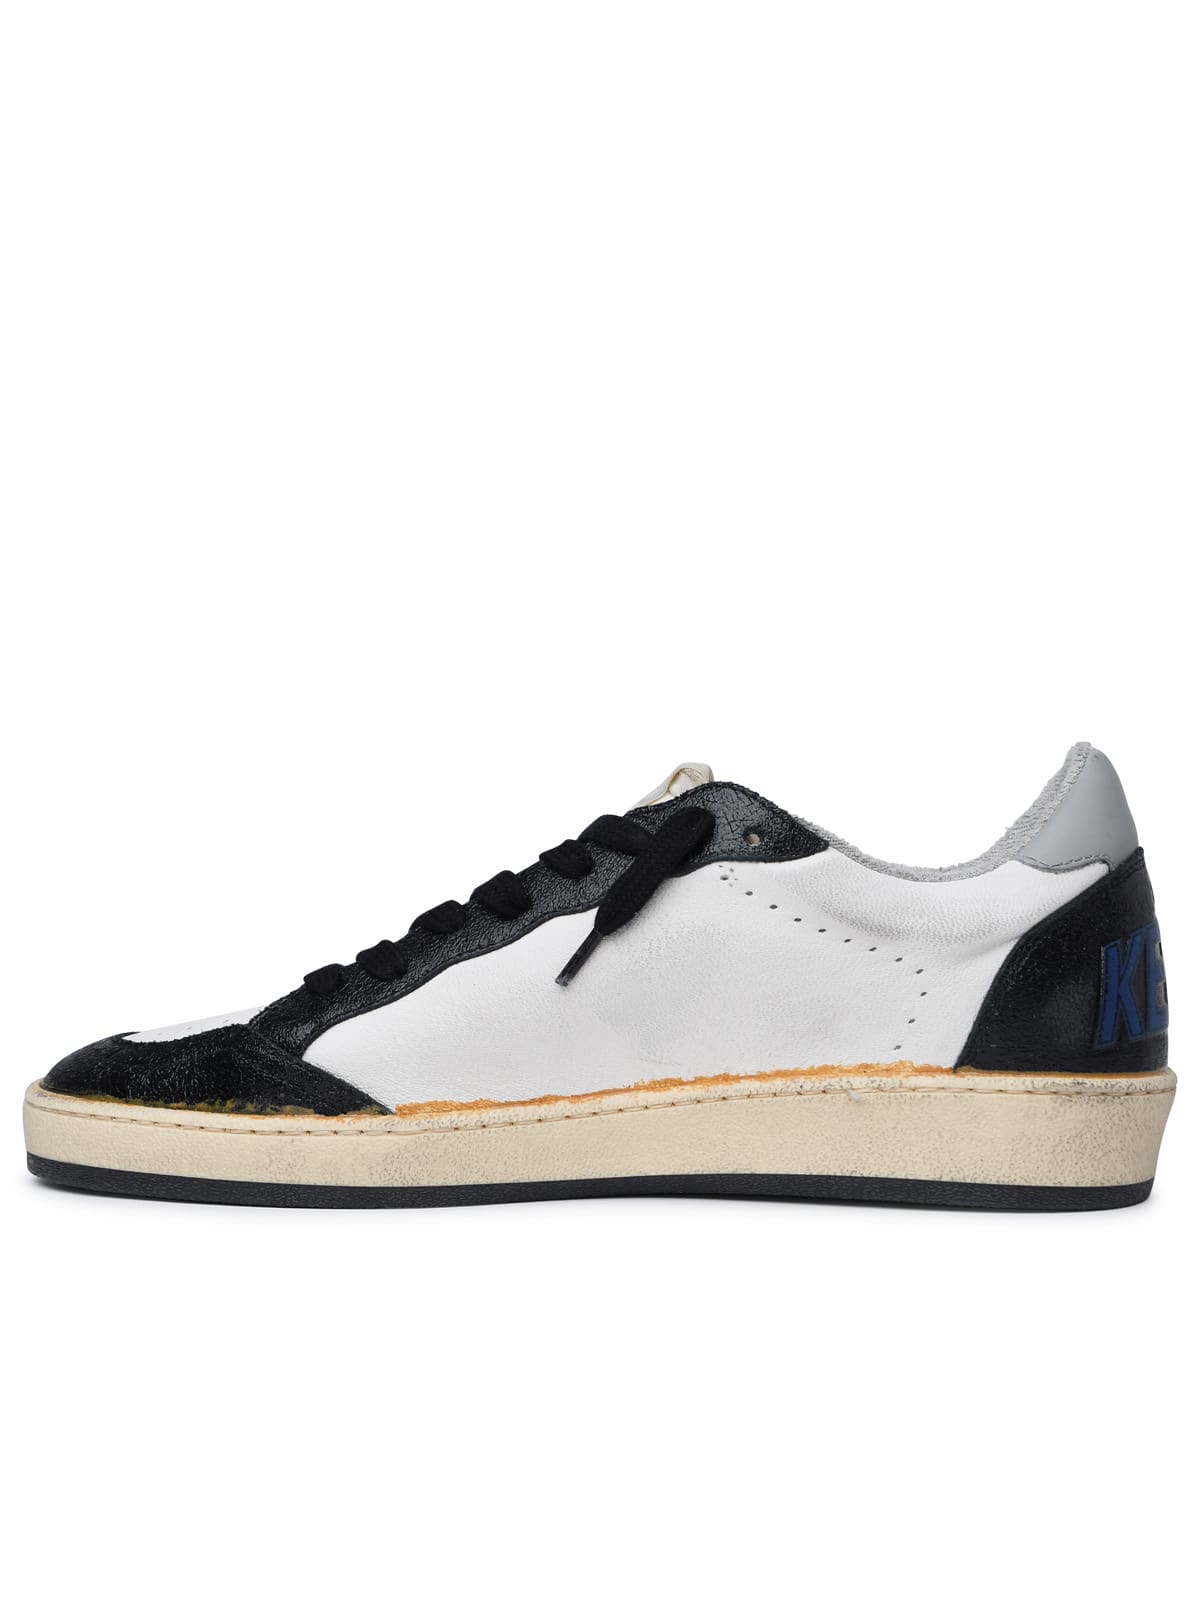 Shop Golden Goose Ball Star White Leather Sneakers In White/black/grey